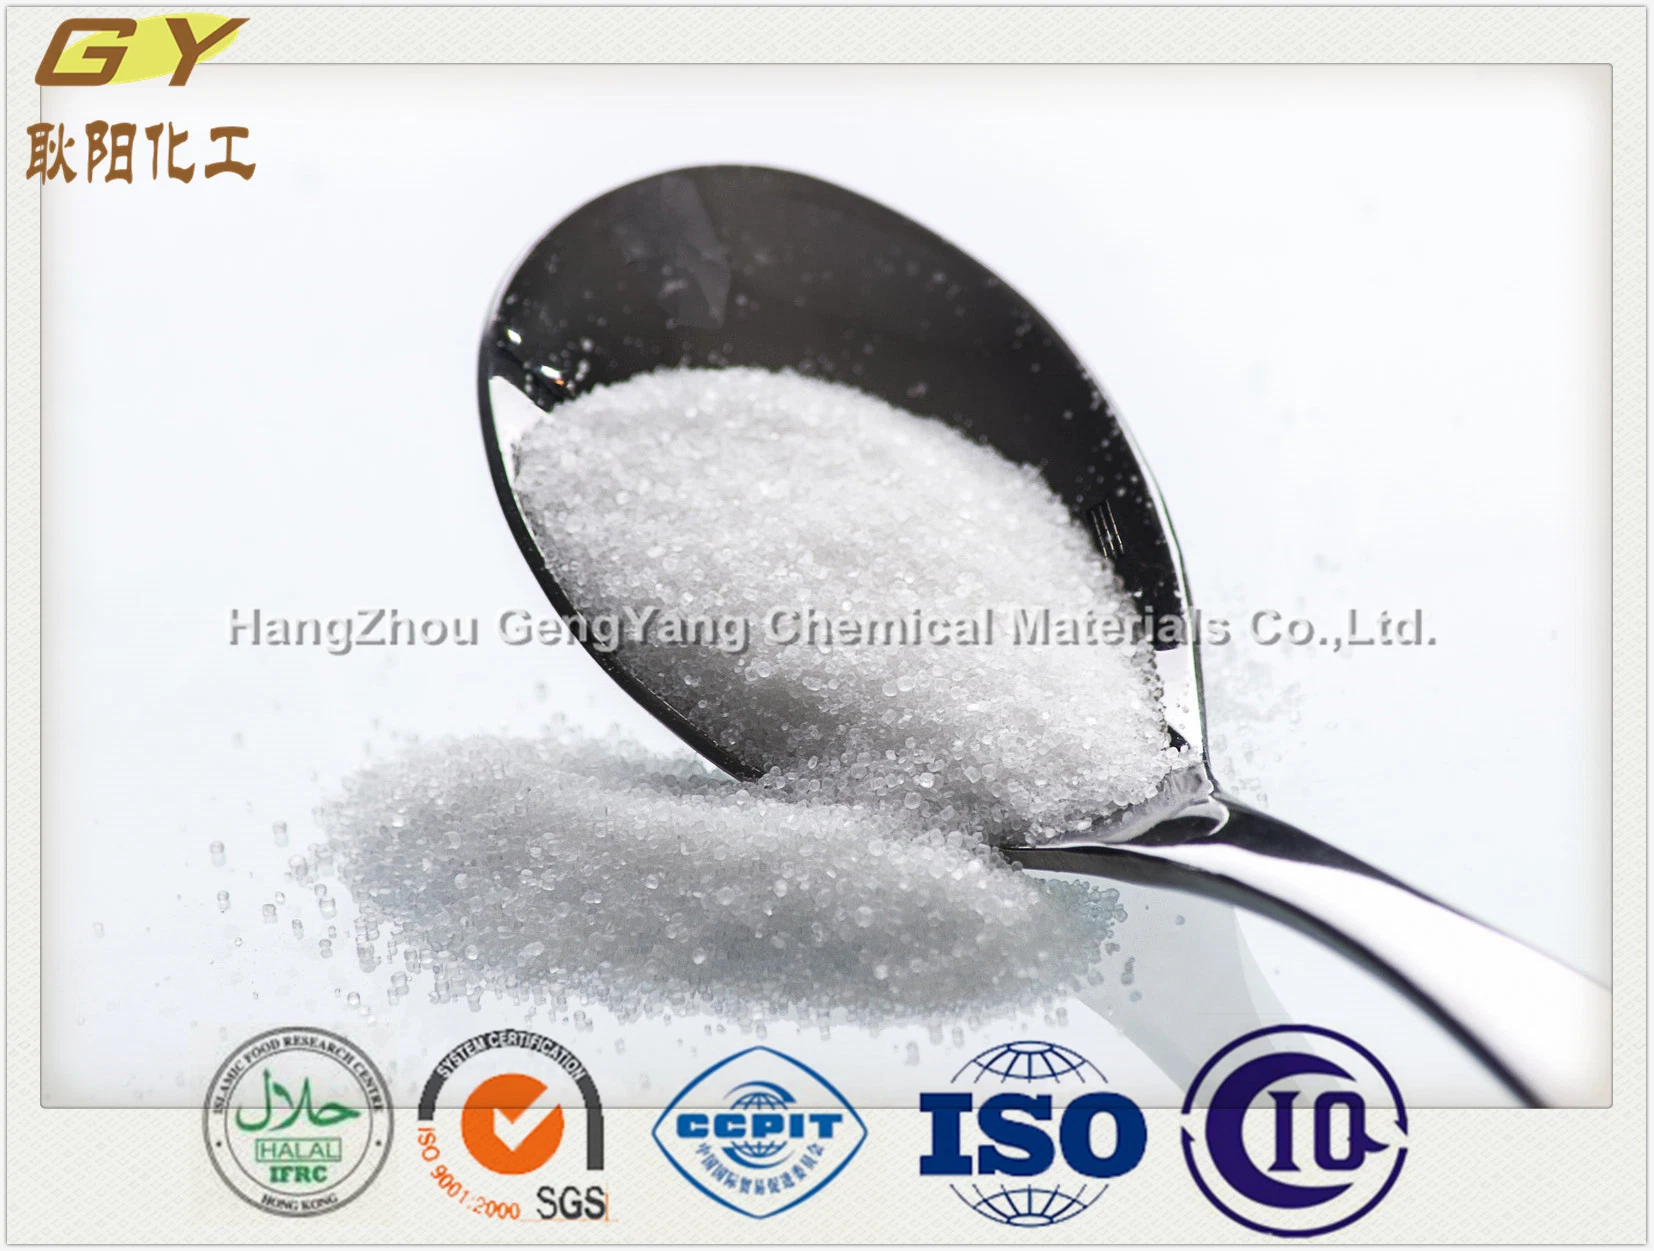 Food Ingredient of E472A Acetylated Mono-and Diglycerides Food Emulsifiers